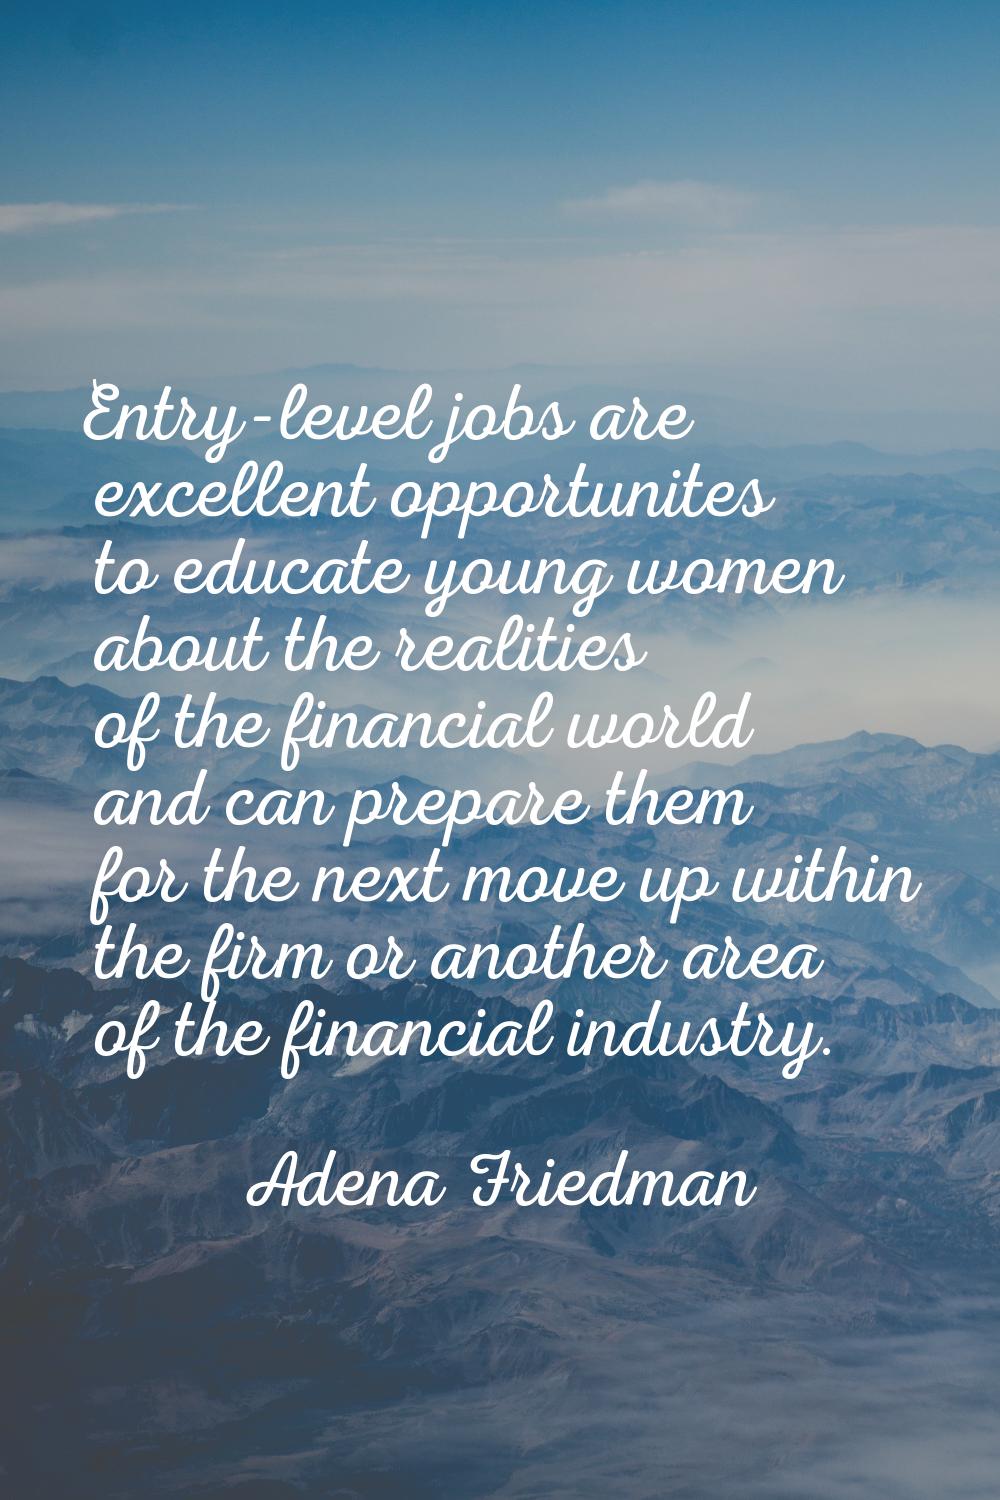 Entry-level jobs are excellent opportunites to educate young women about the realities of the finan